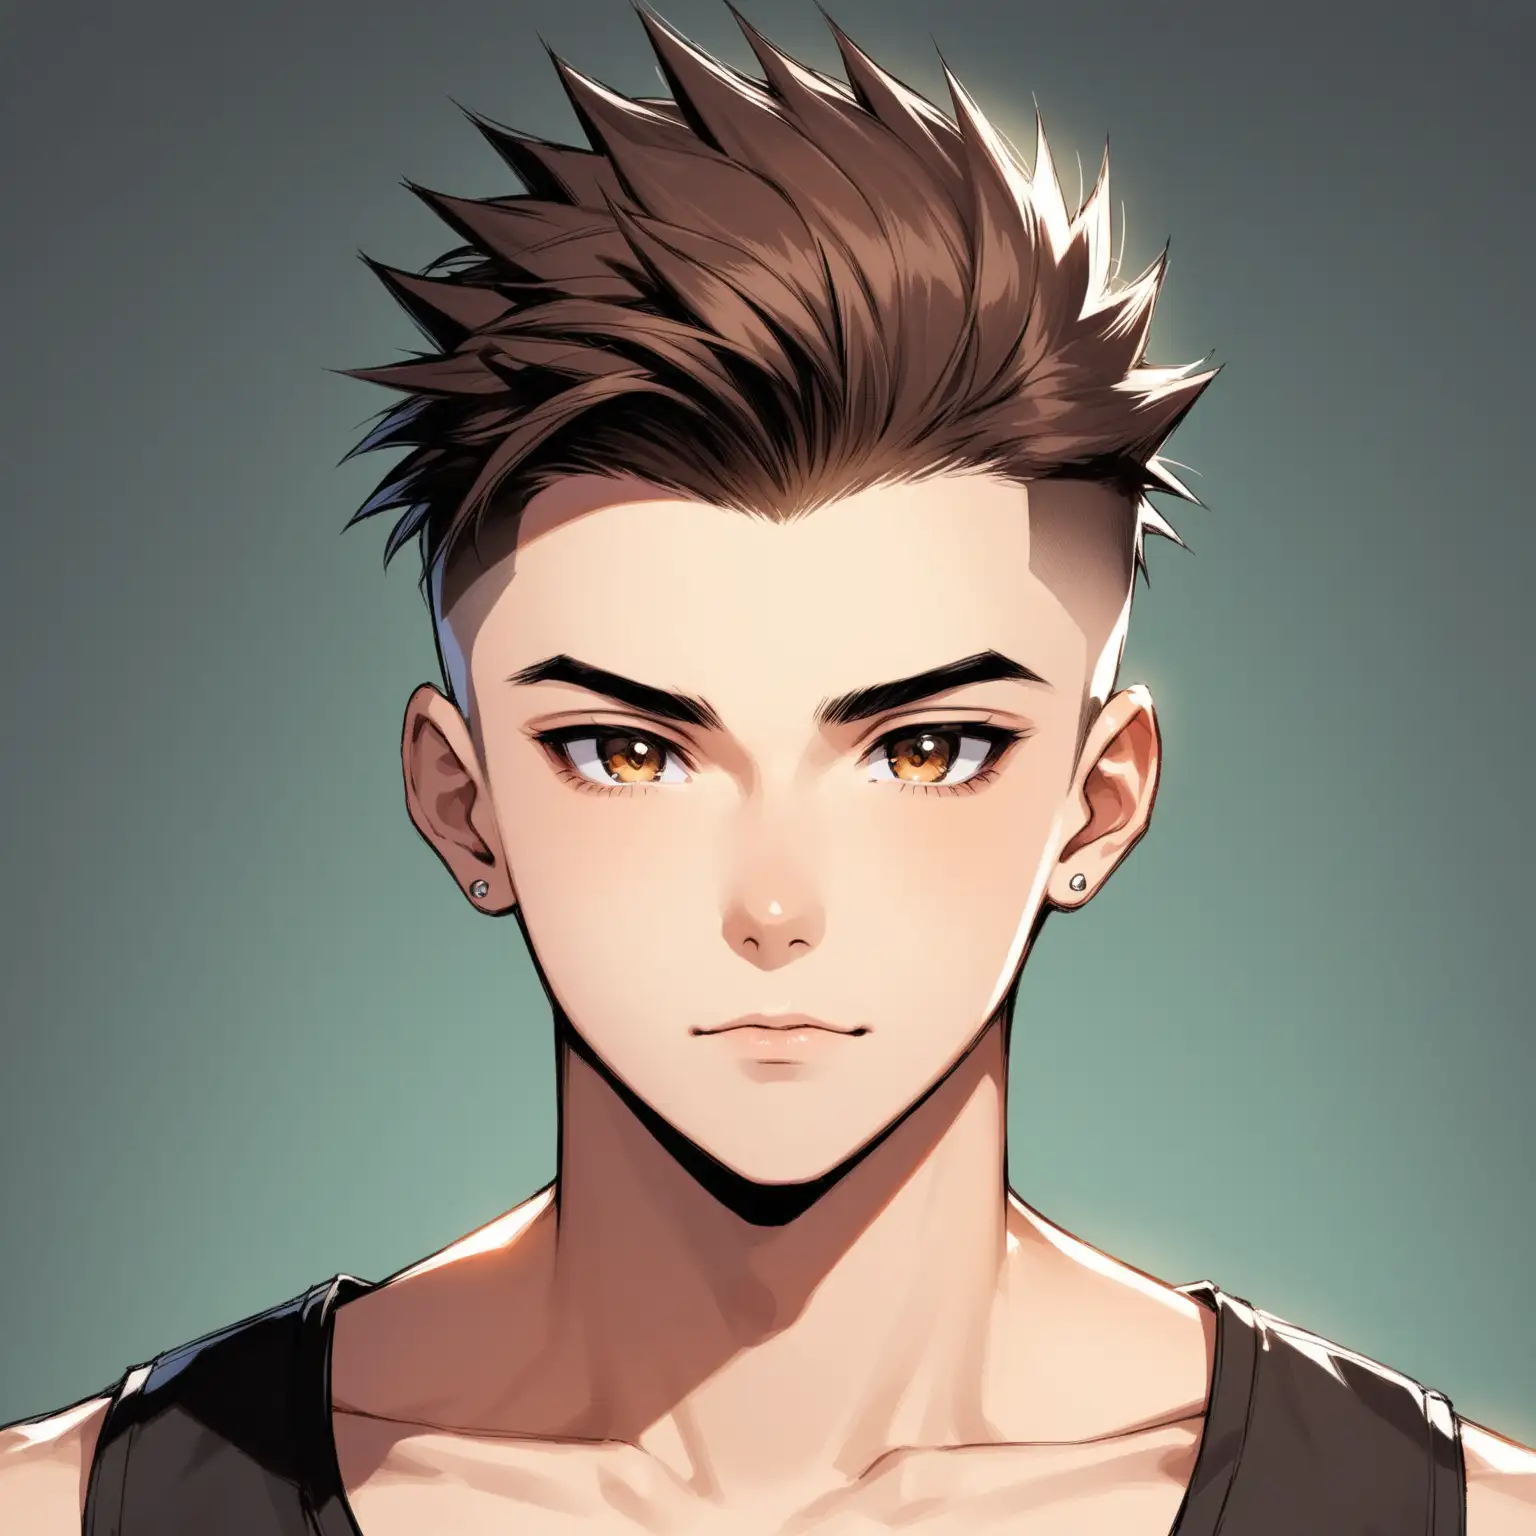 Stylish Young Man with Short Spiked Buzzed Brown Hair in Front View